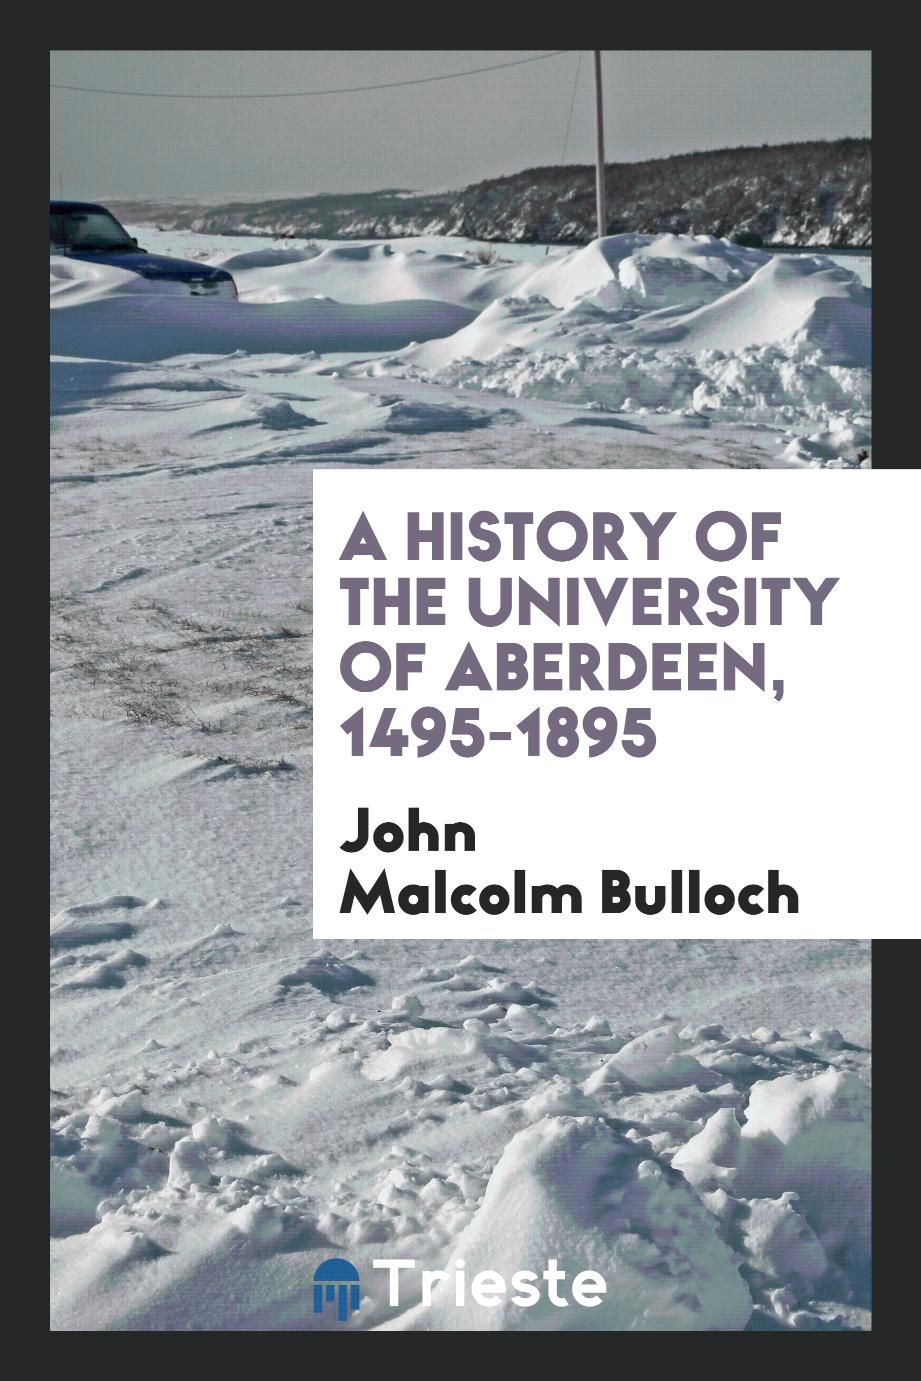 A History of the University of Aberdeen, 1495-1895